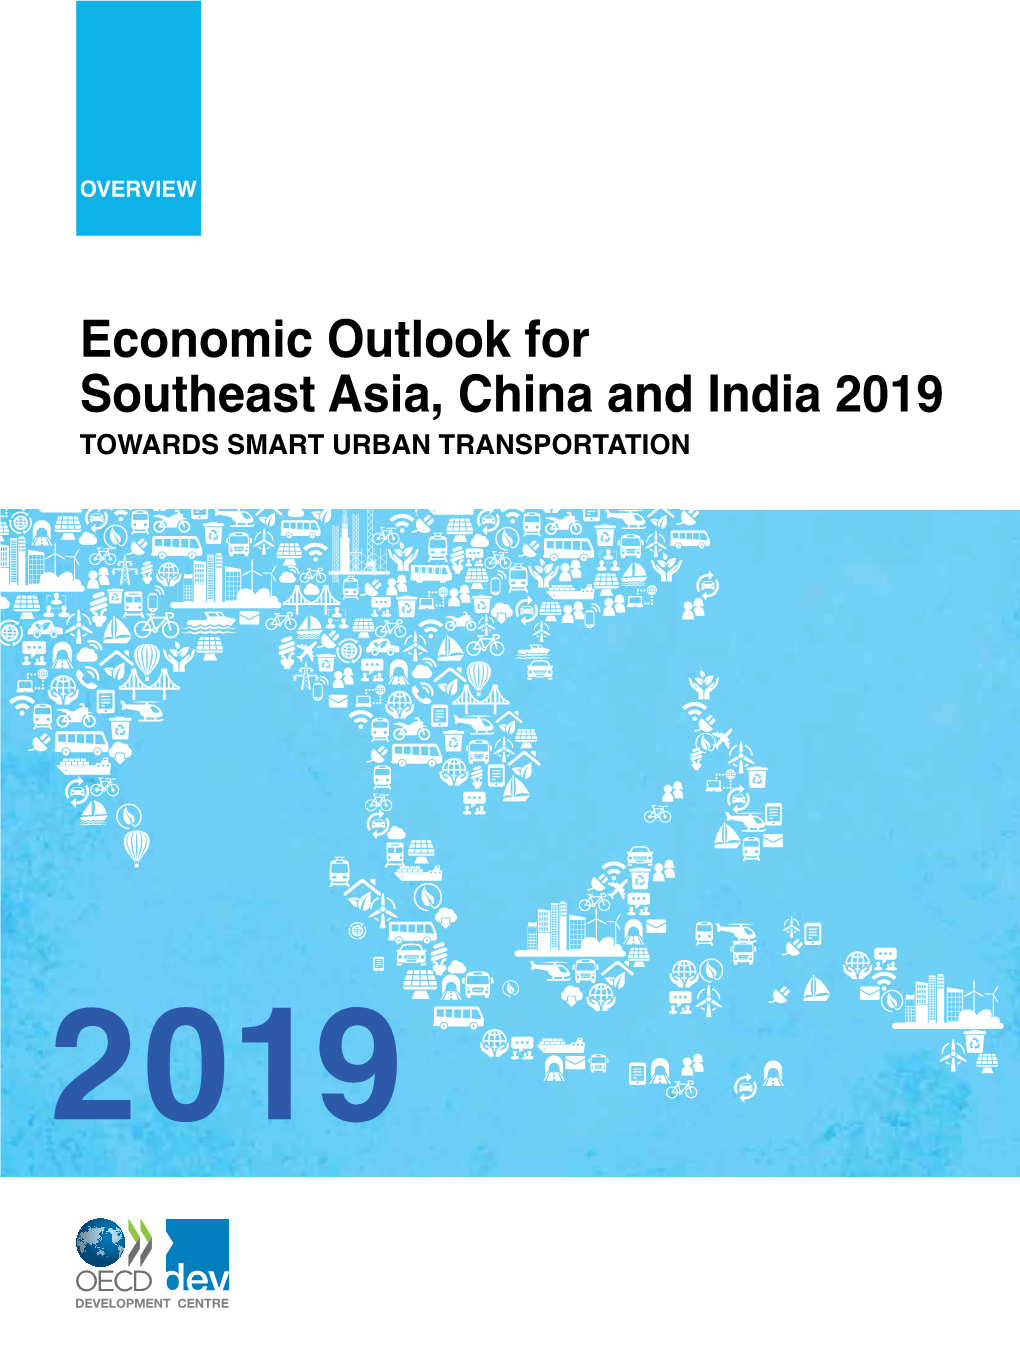 Economic Outlook for Southeast Asia, China and India 2019 TOWARDS SMART URBAN TRANSPORTATION